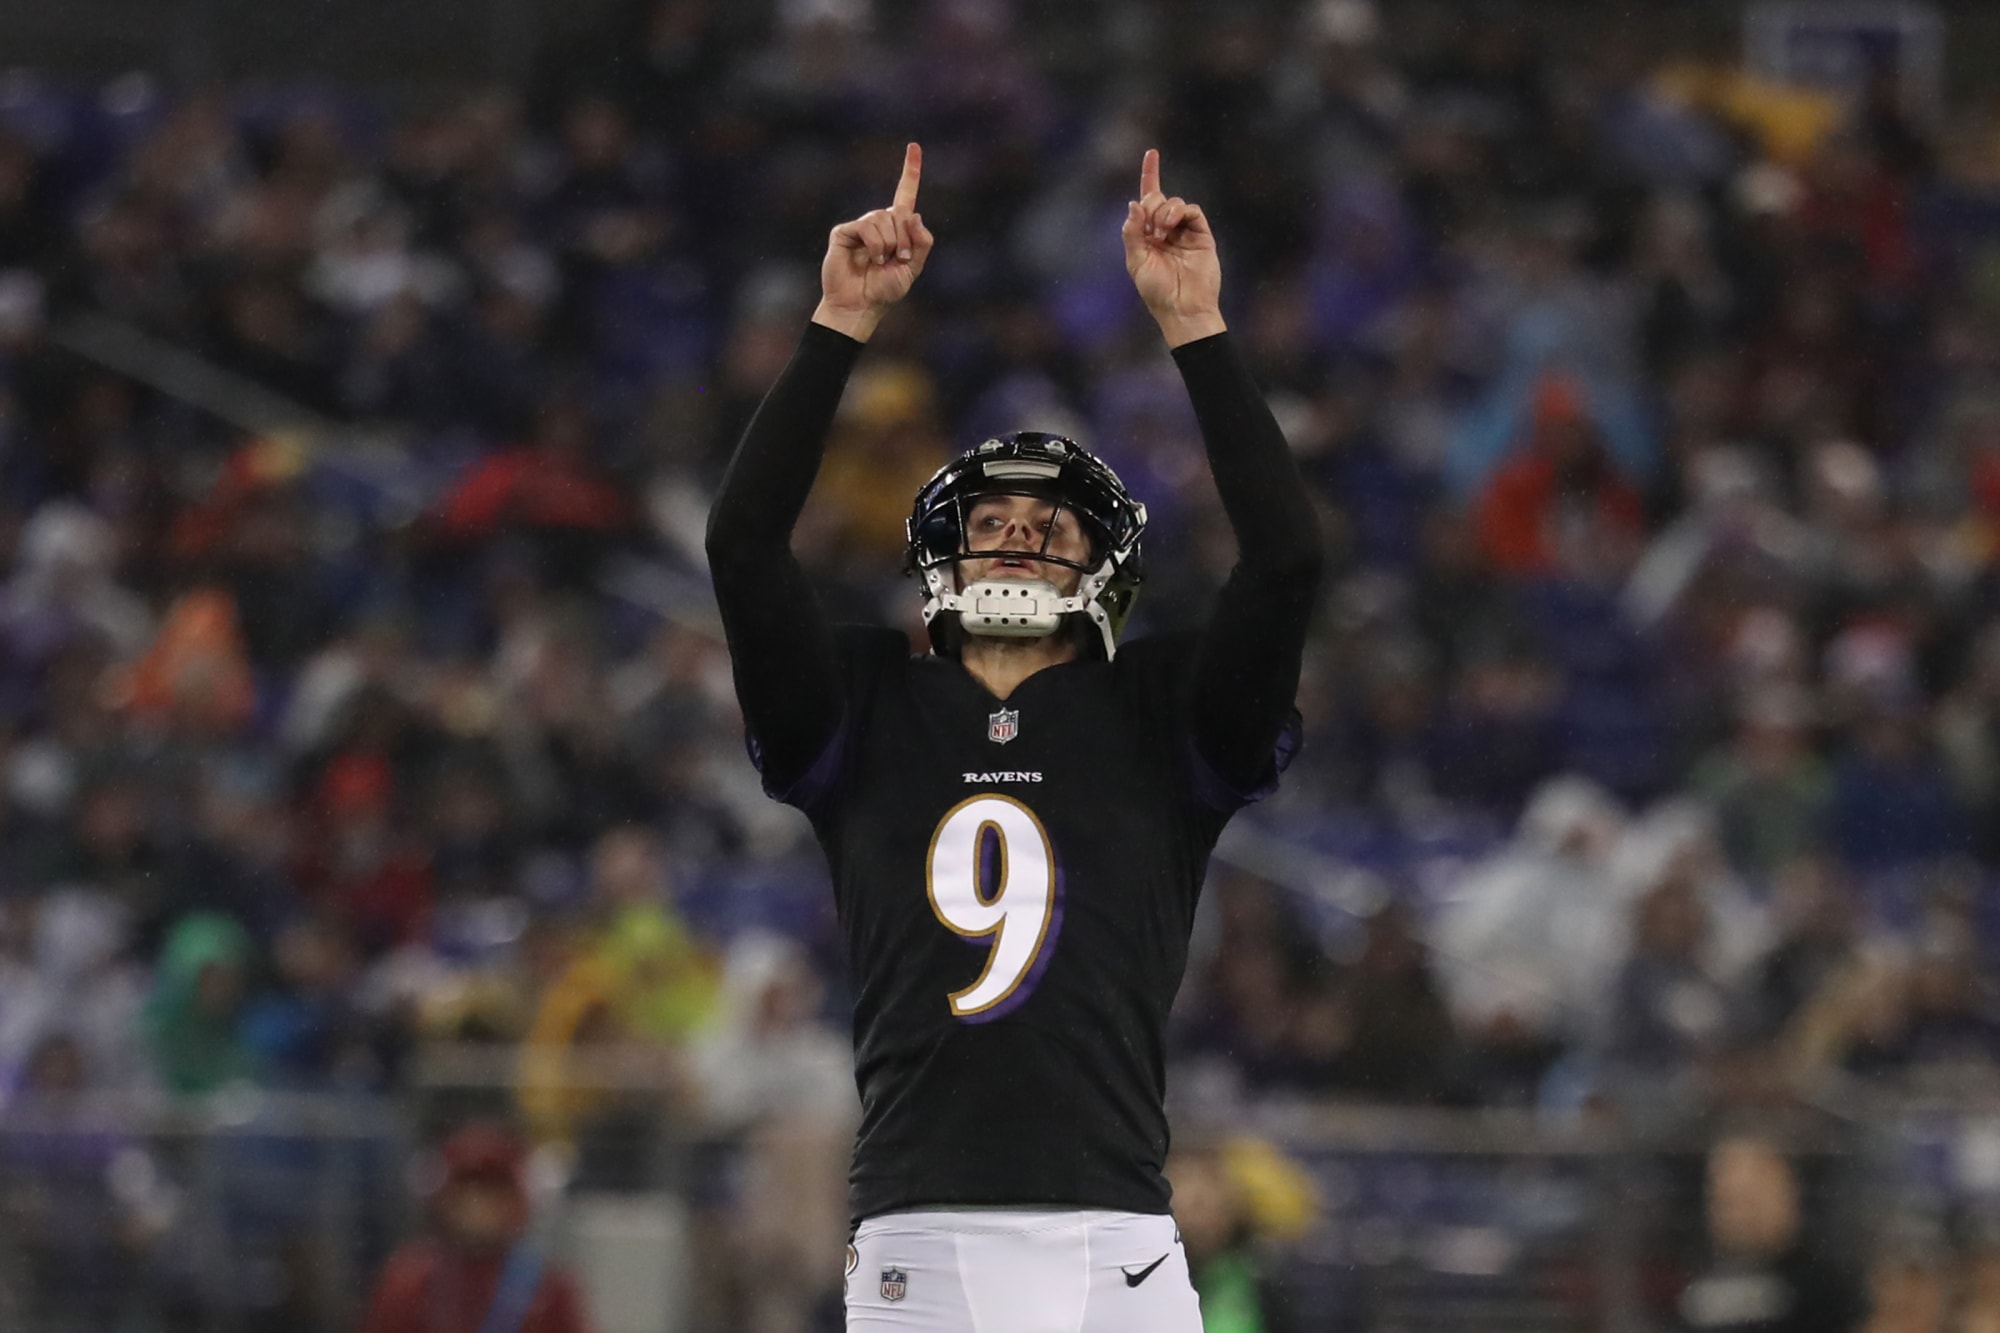 Justin Tucker On His Way To Being Greatest Kicker Of All Time